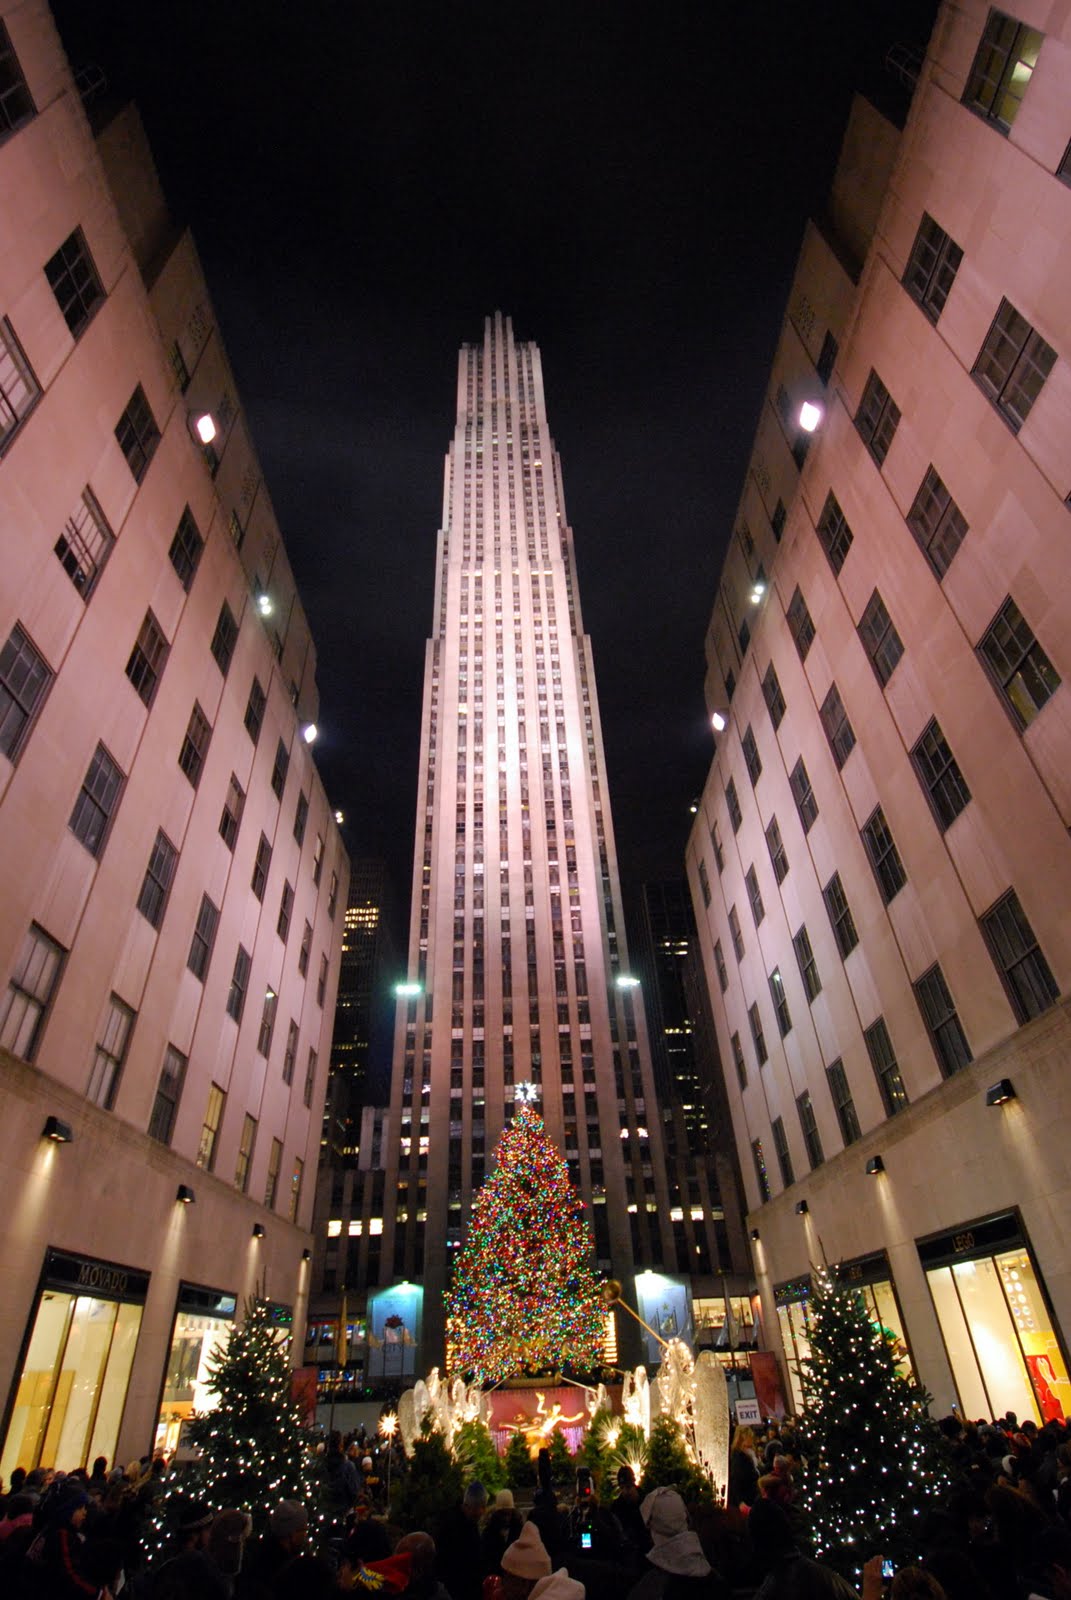 Sound the Trumpets! World Famous Rockefeller Tree Has Been Chosen